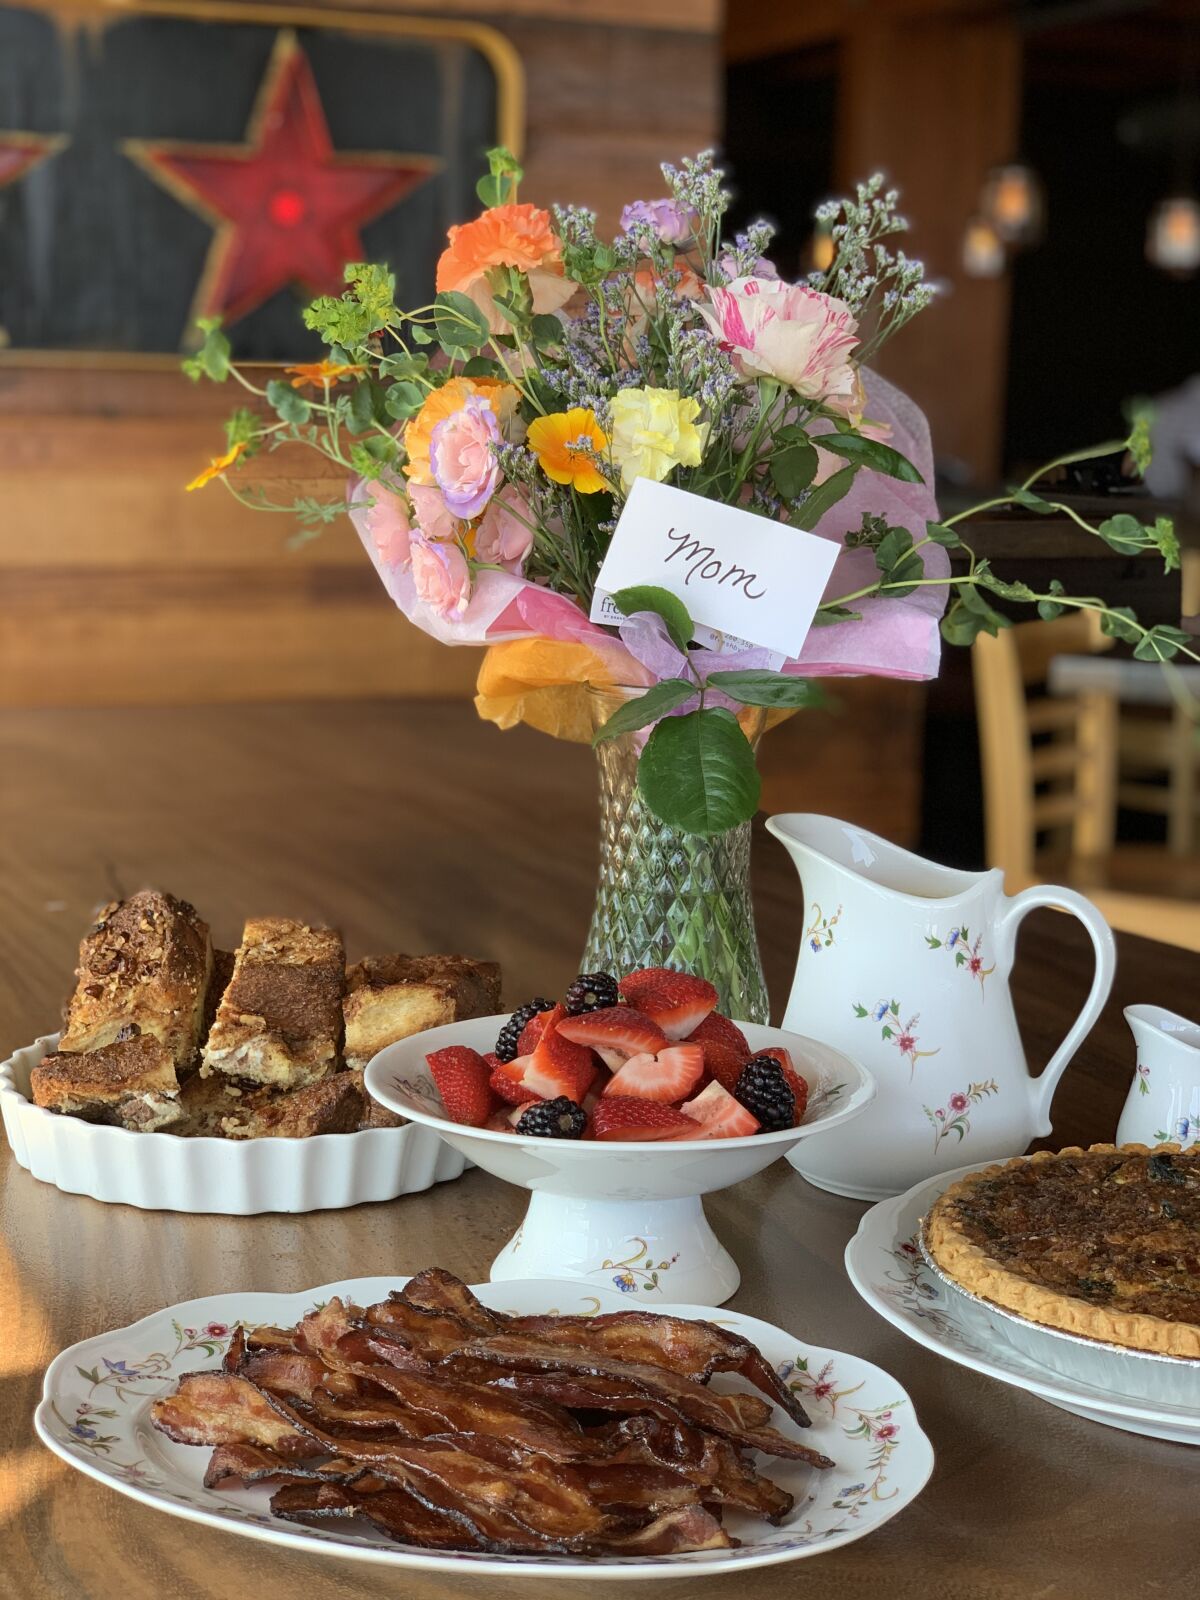 Jimmy’s Famous American Tavern is offering brunch kits for Mother's Day.